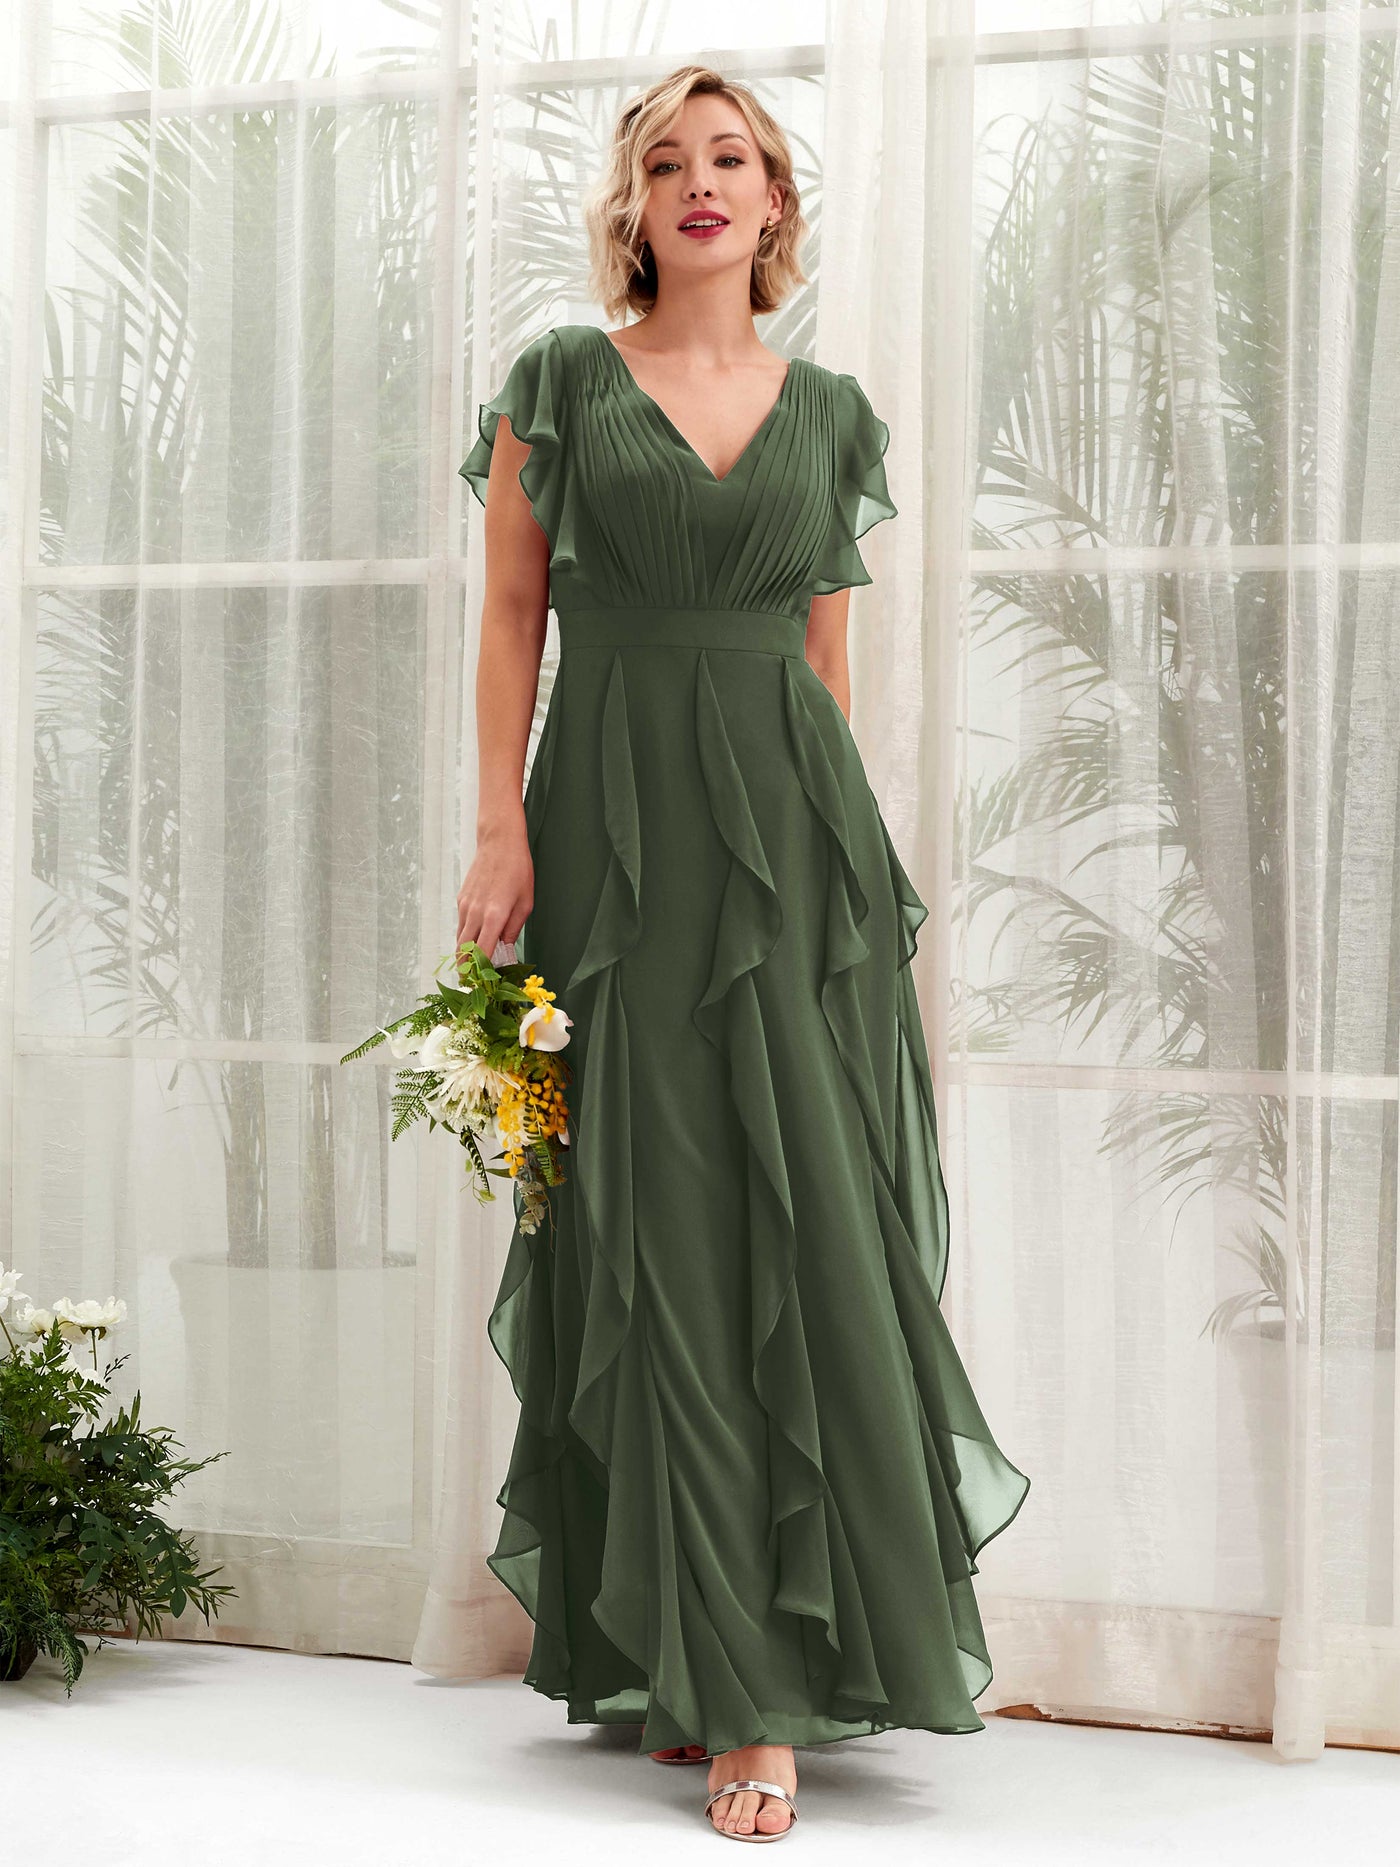 Olive Green Lace Mother of the Bride Dresses Sleeves · dressydances ·  Online Store Powered by Storenvy